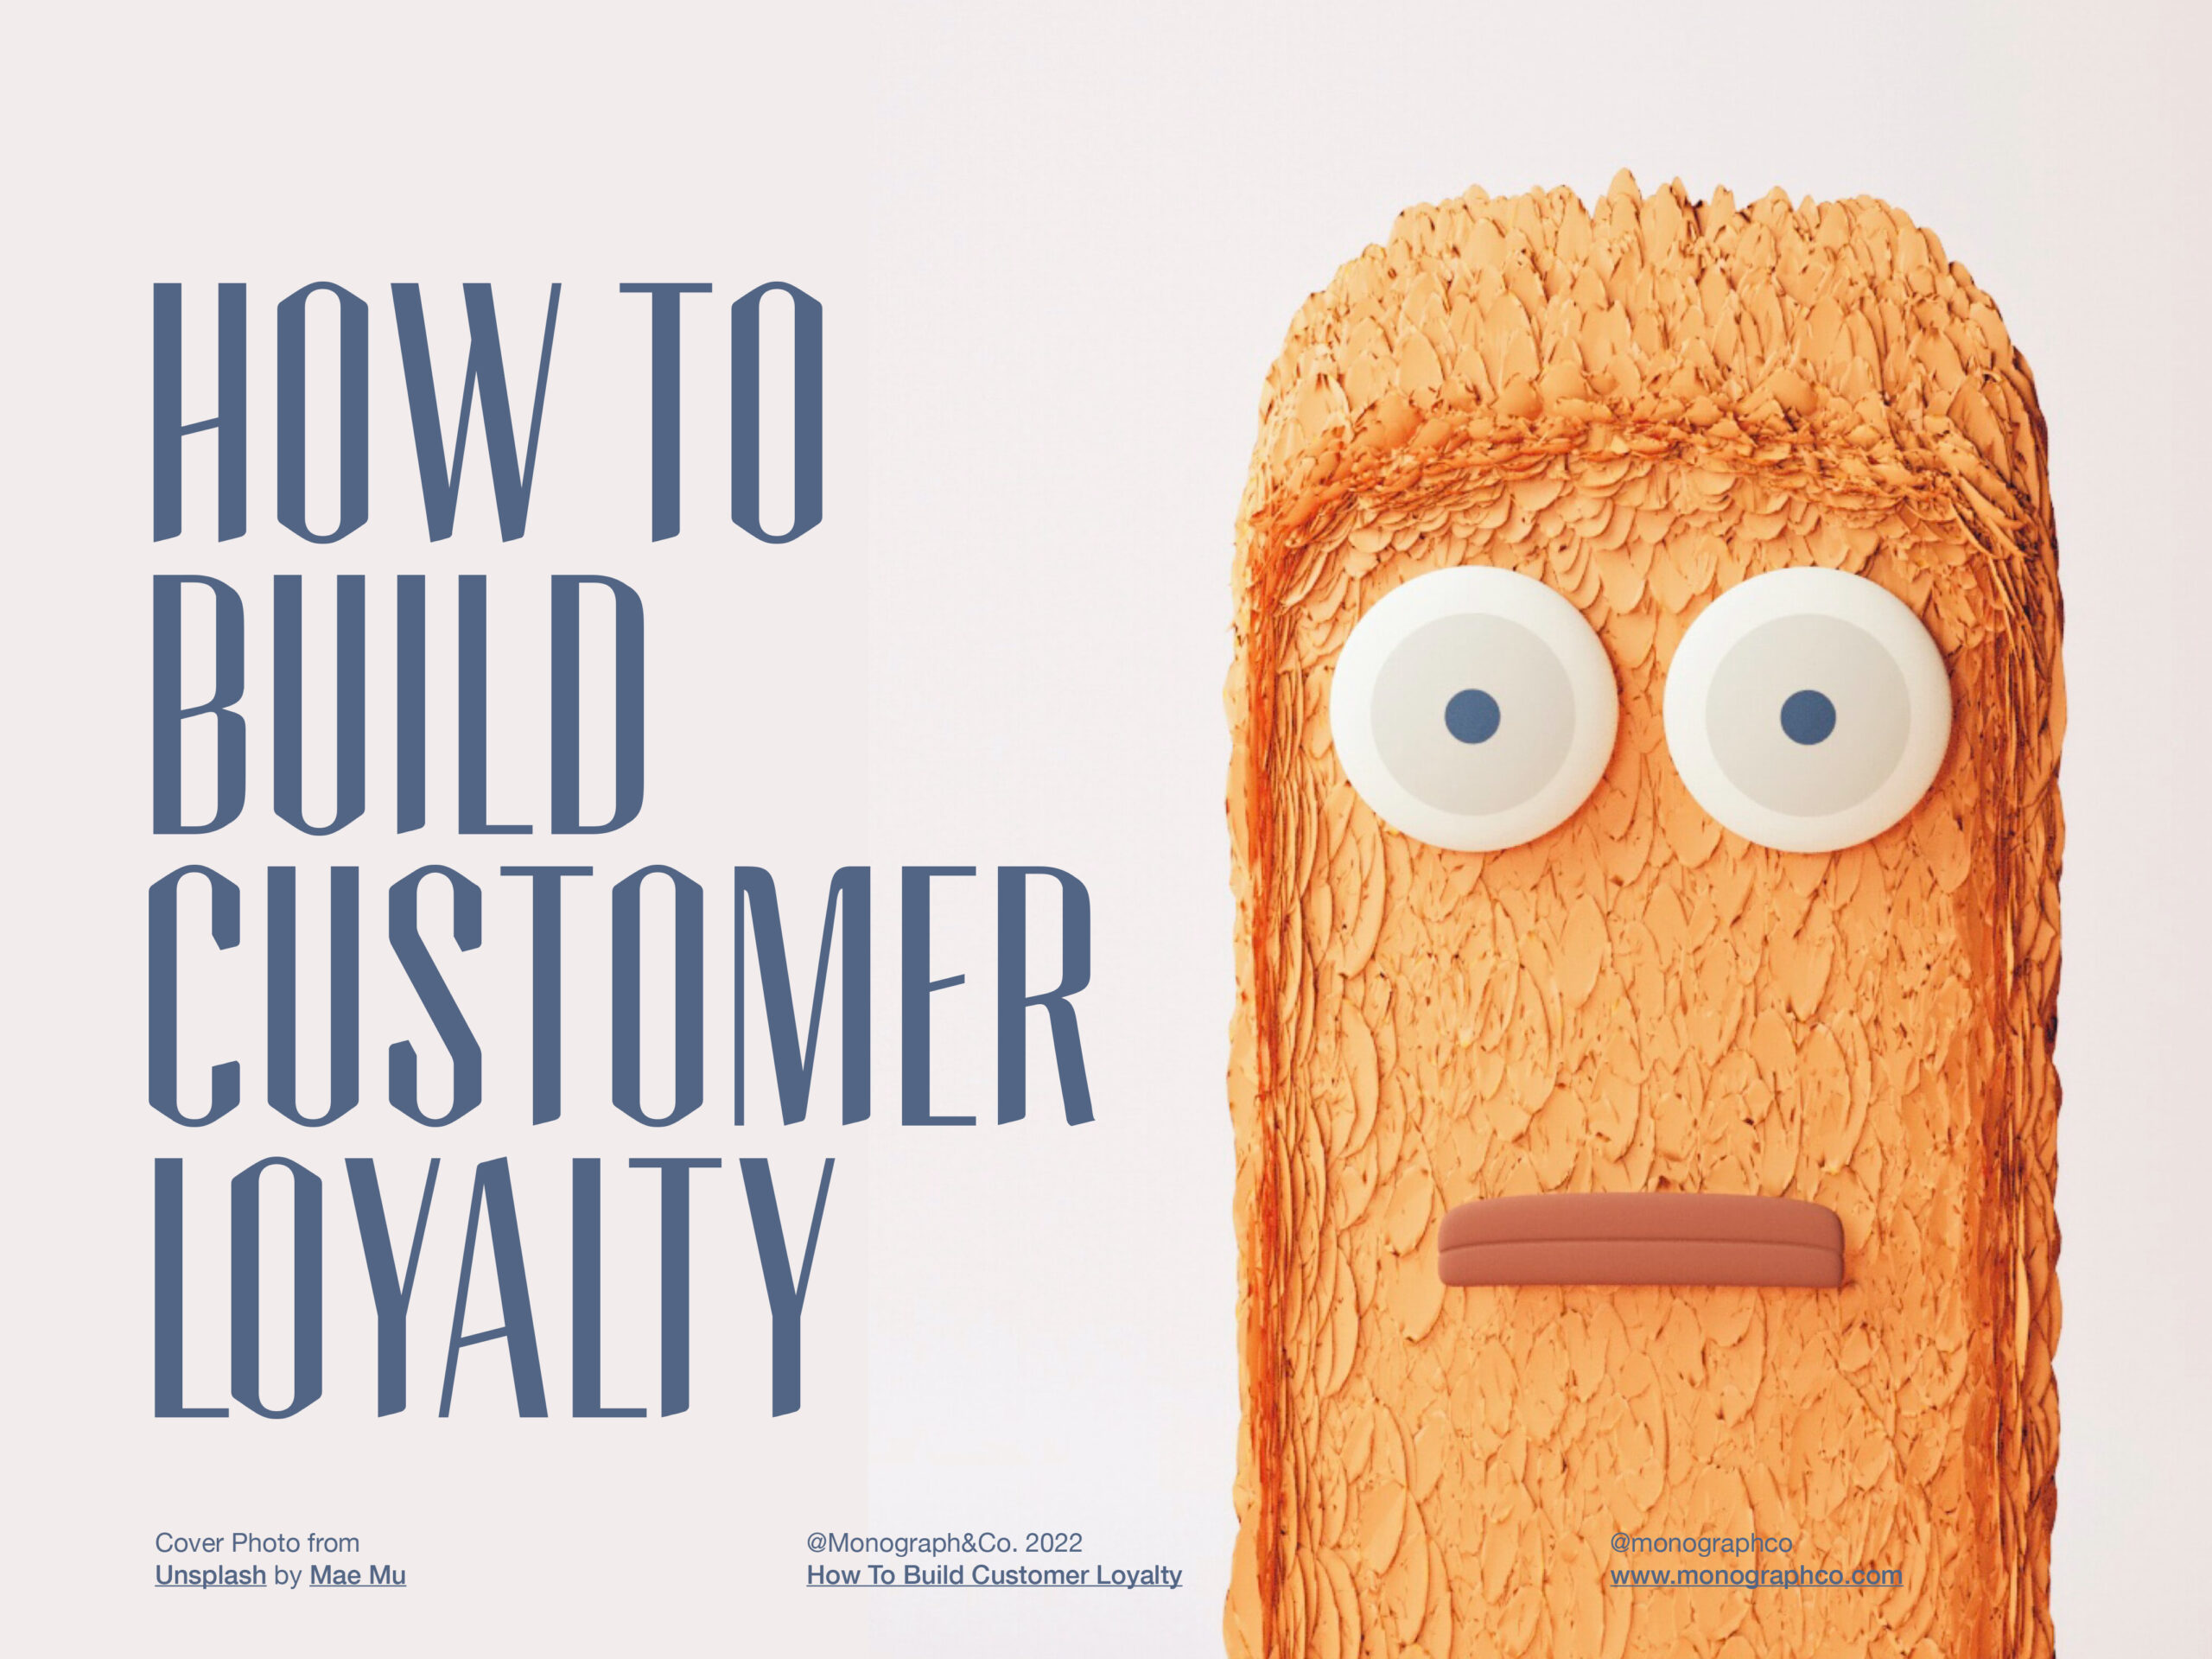 How to build customer loyalty online